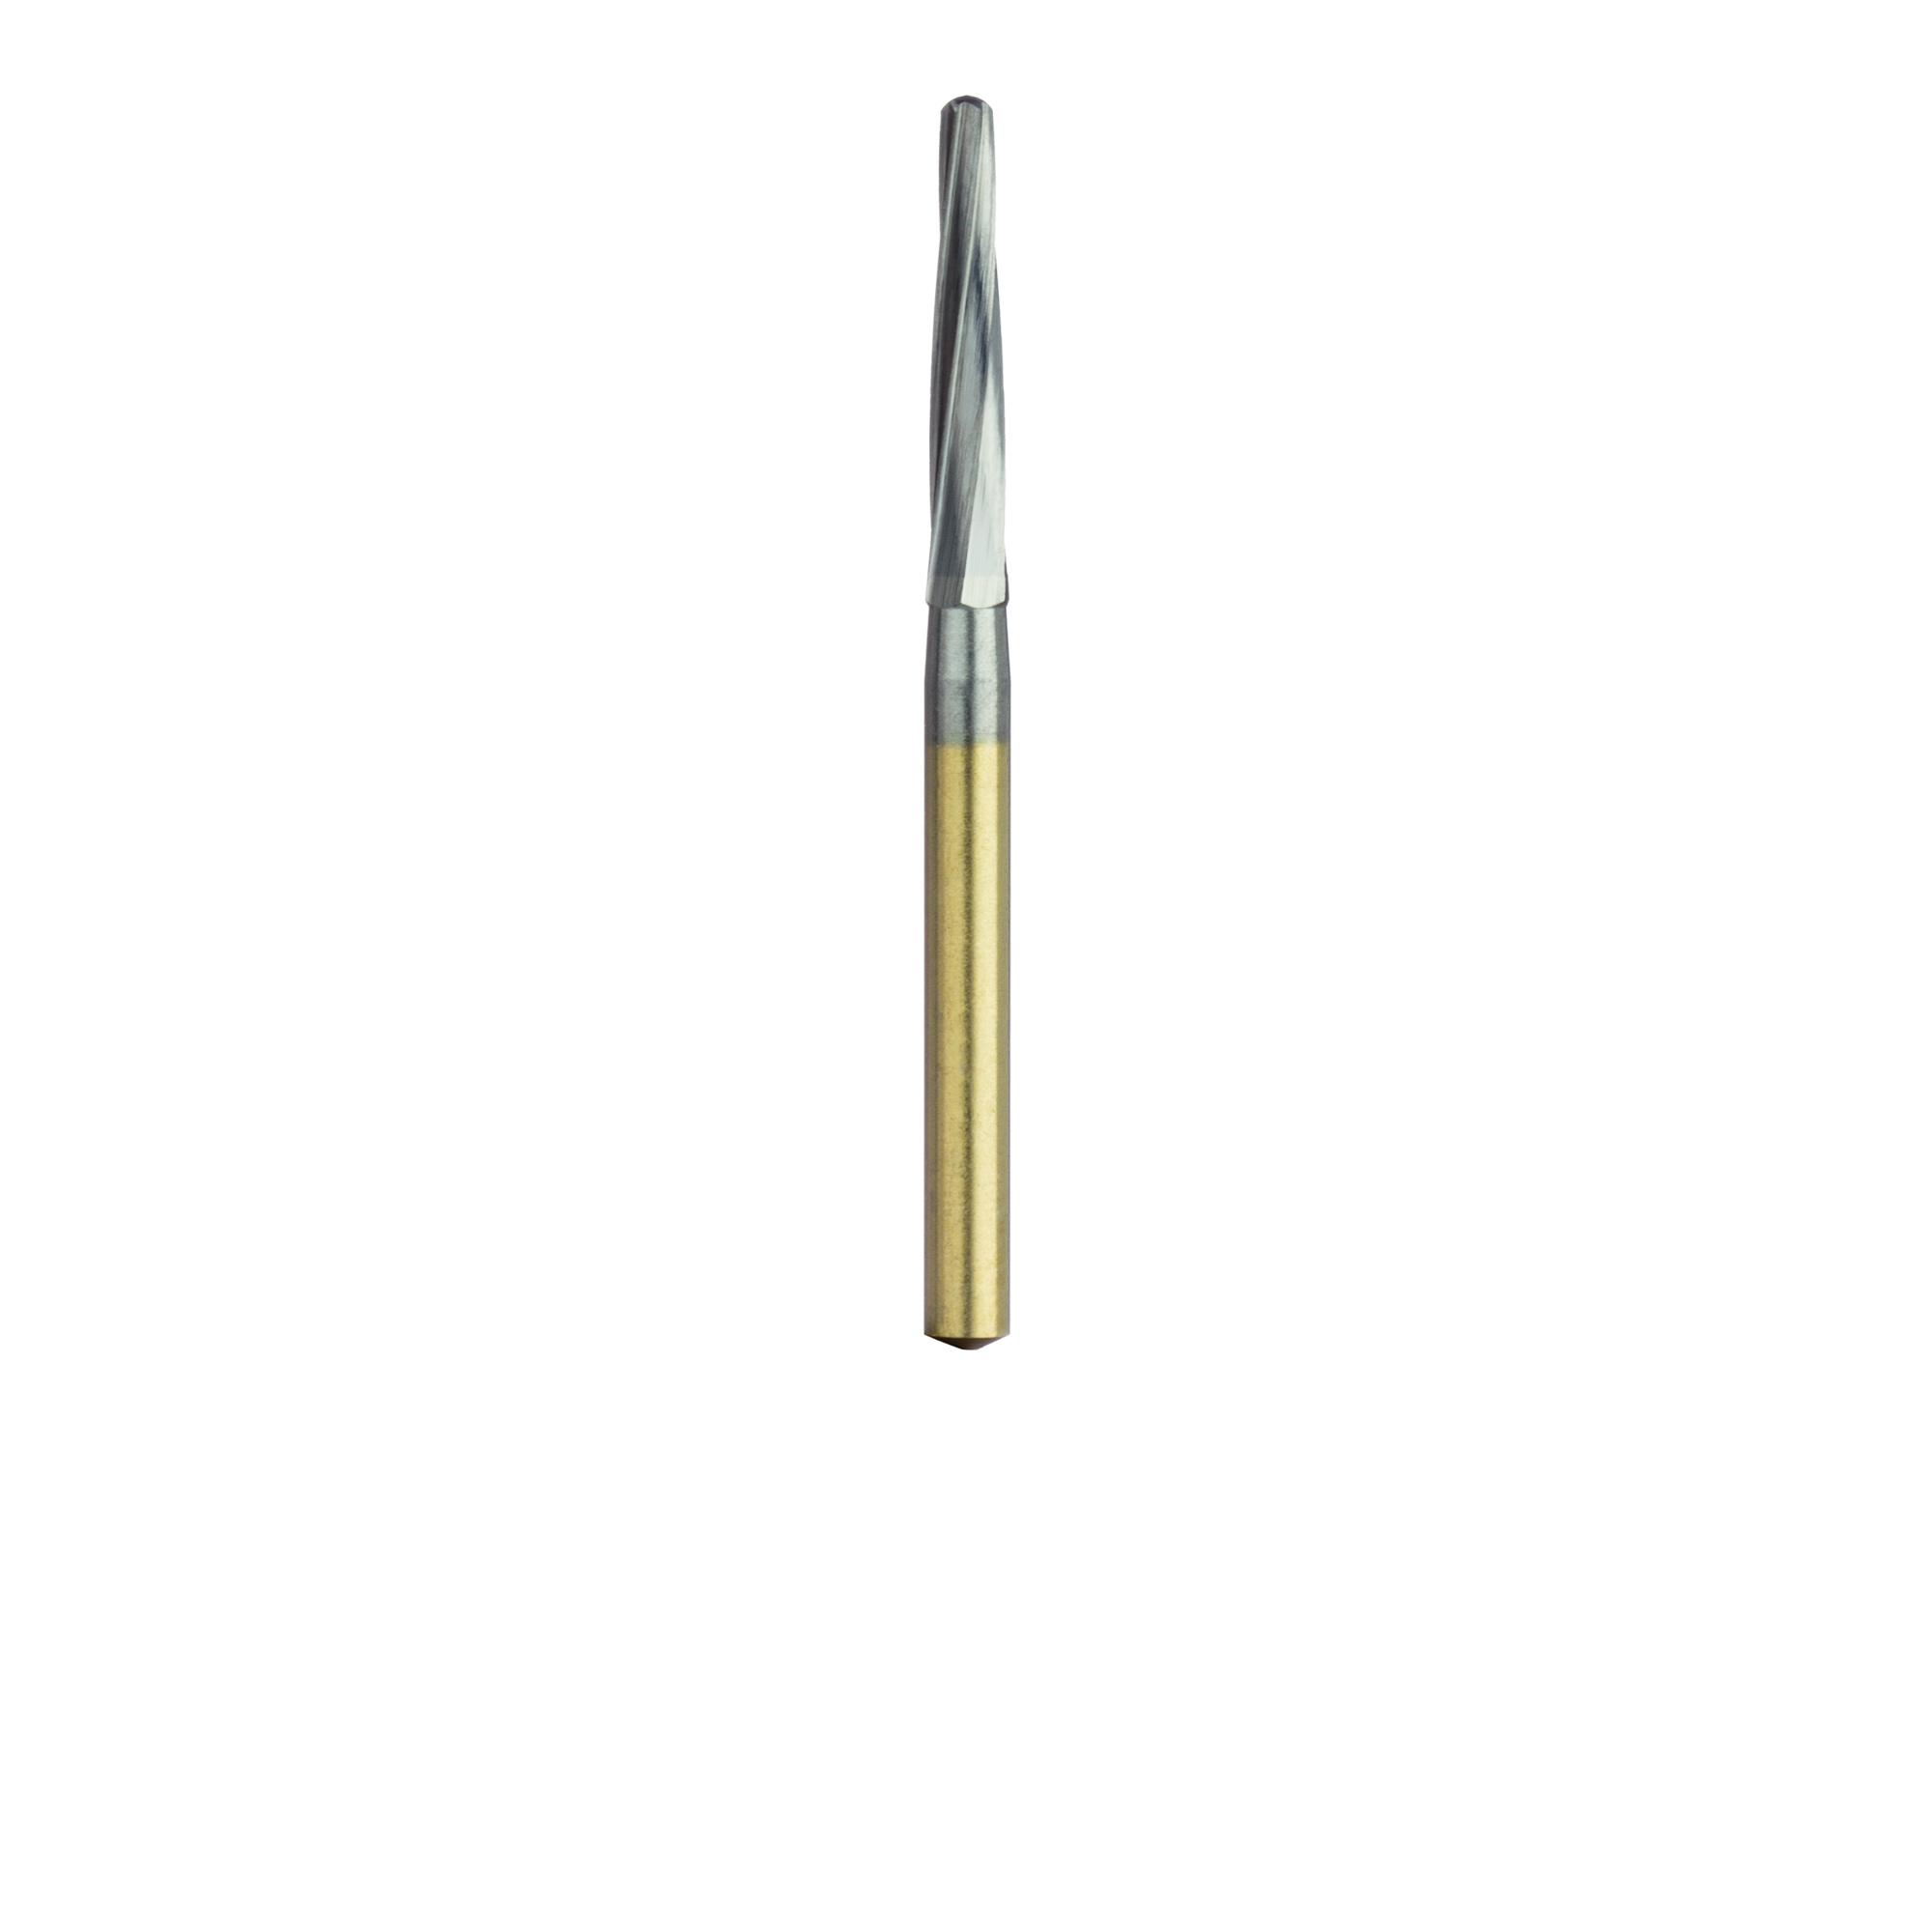 HMG152-016-FGL Surgical Carbide Bur, Round End Taper, Surgical Cutter, Gold Plated, 1.6mm Ø, FGL